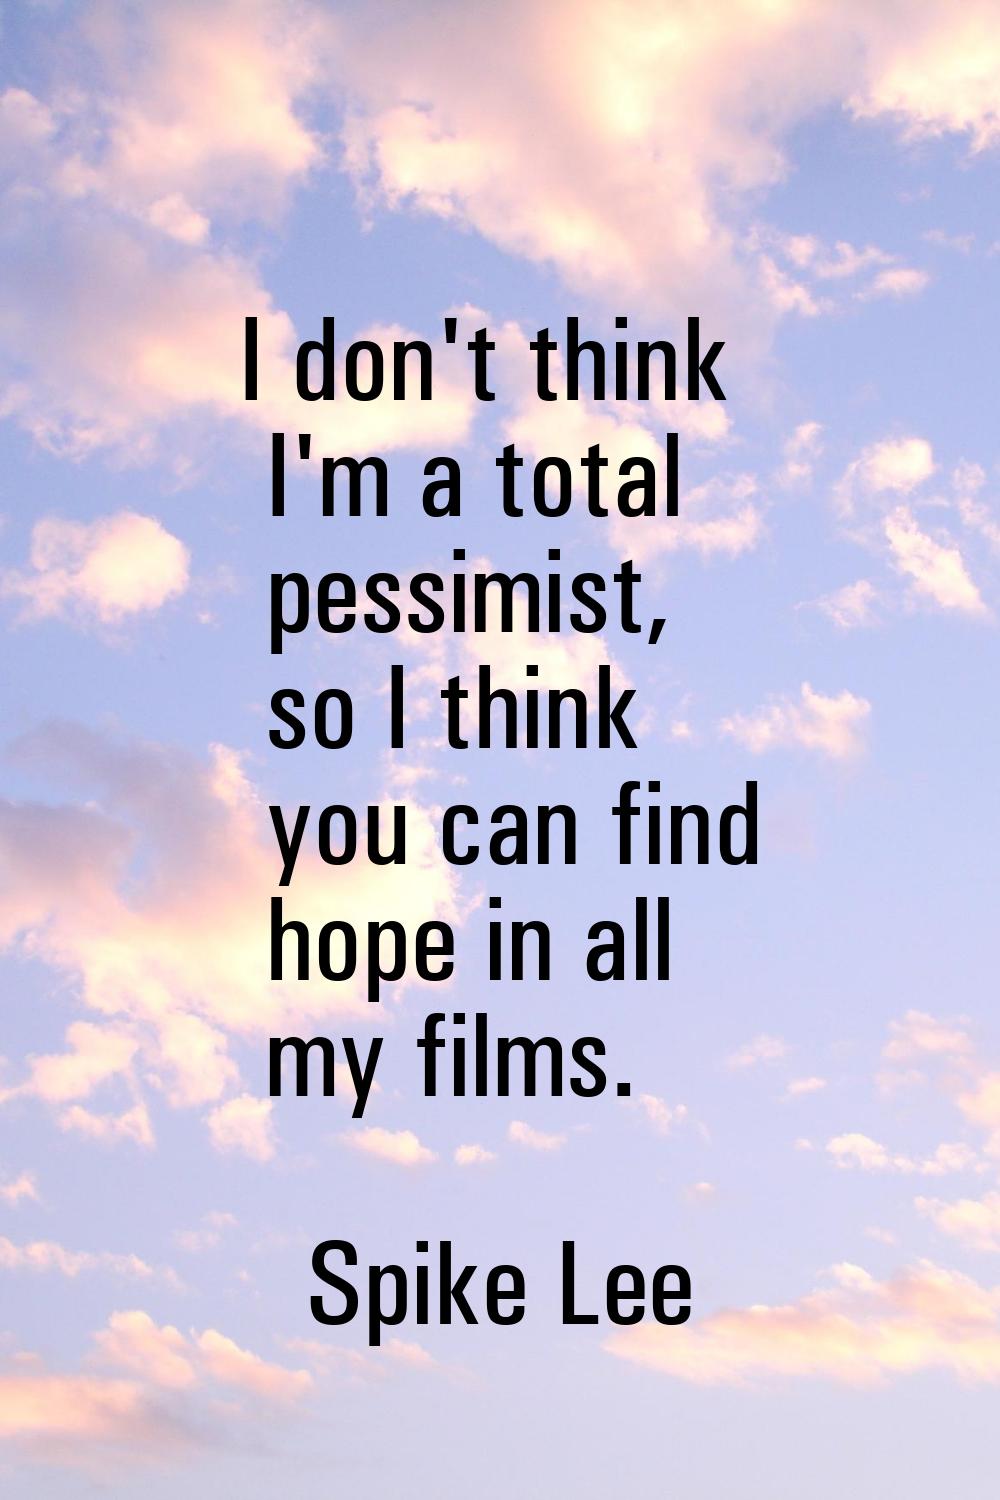 I don't think I'm a total pessimist, so I think you can find hope in all my films.